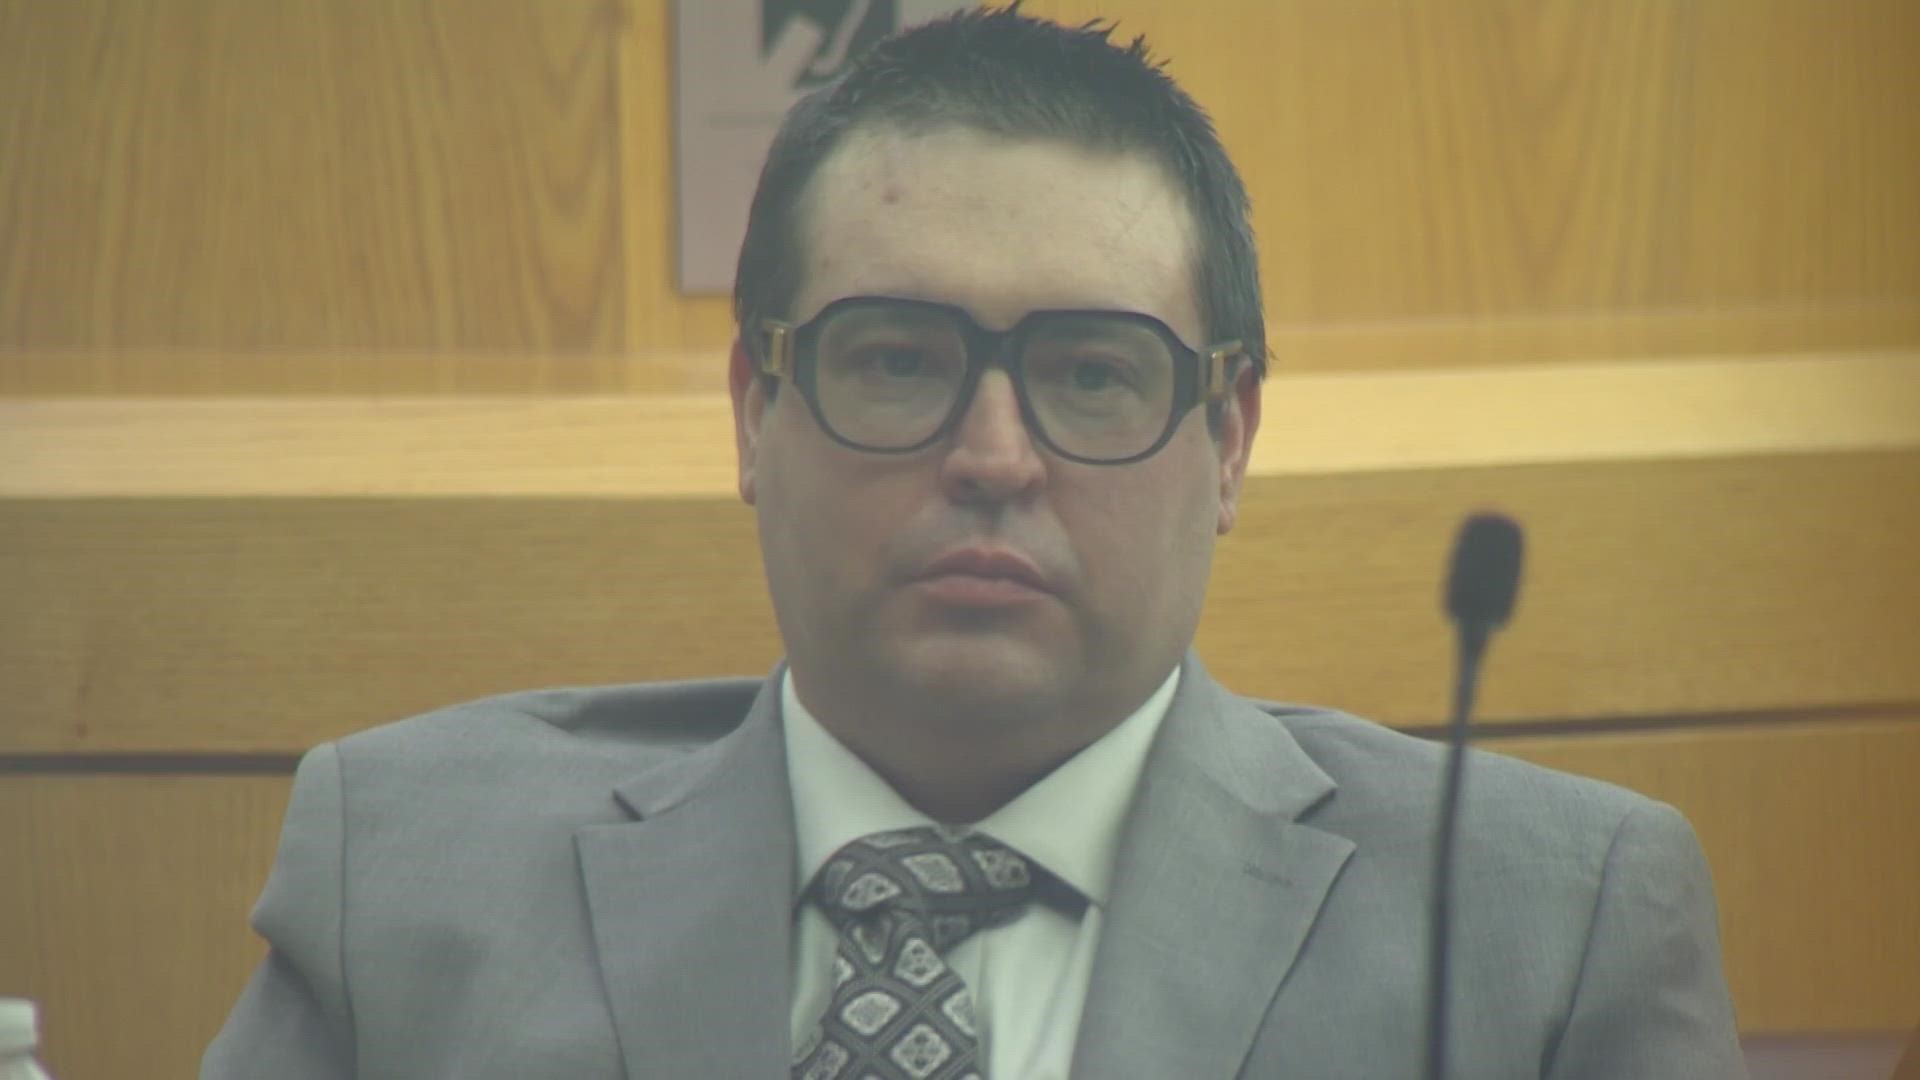 Richard Acosta Jr. is accused of capital murder for driving his then 14yo son Abel Acosta to and from a triple murder scene in Garland in 2021.